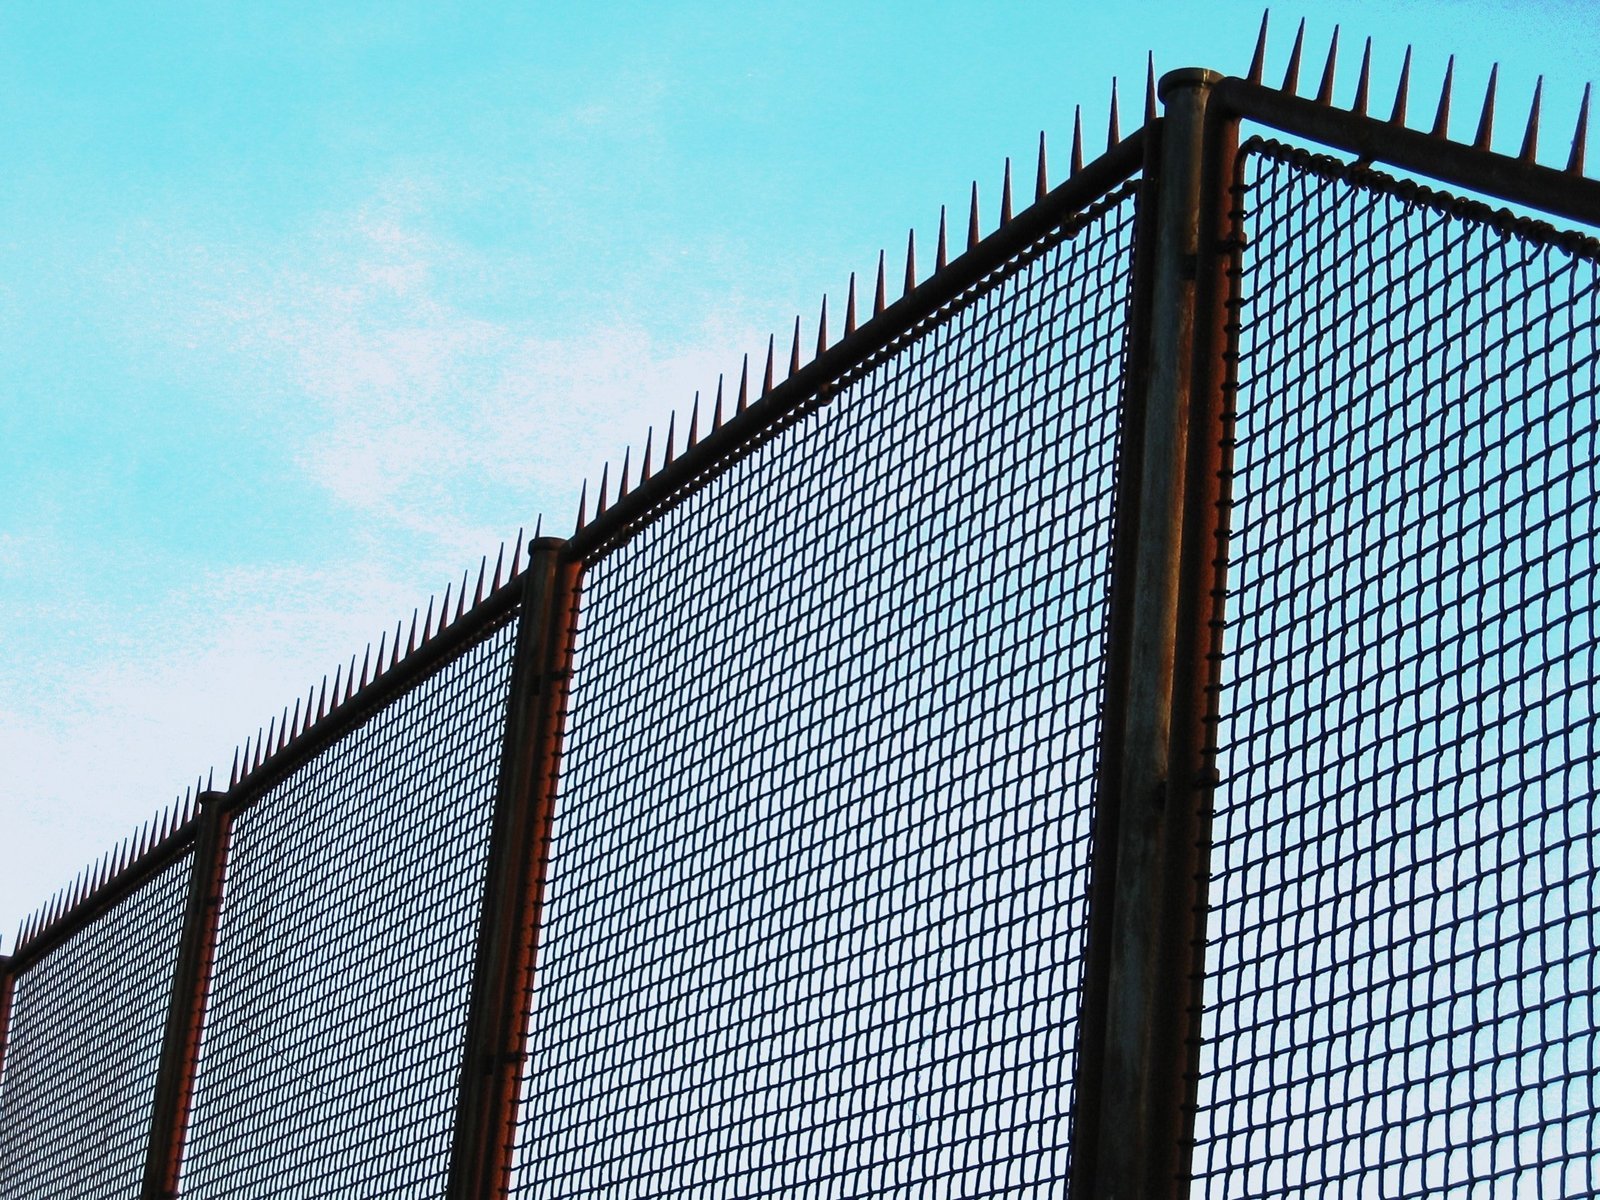 the side of an iron fence is shown